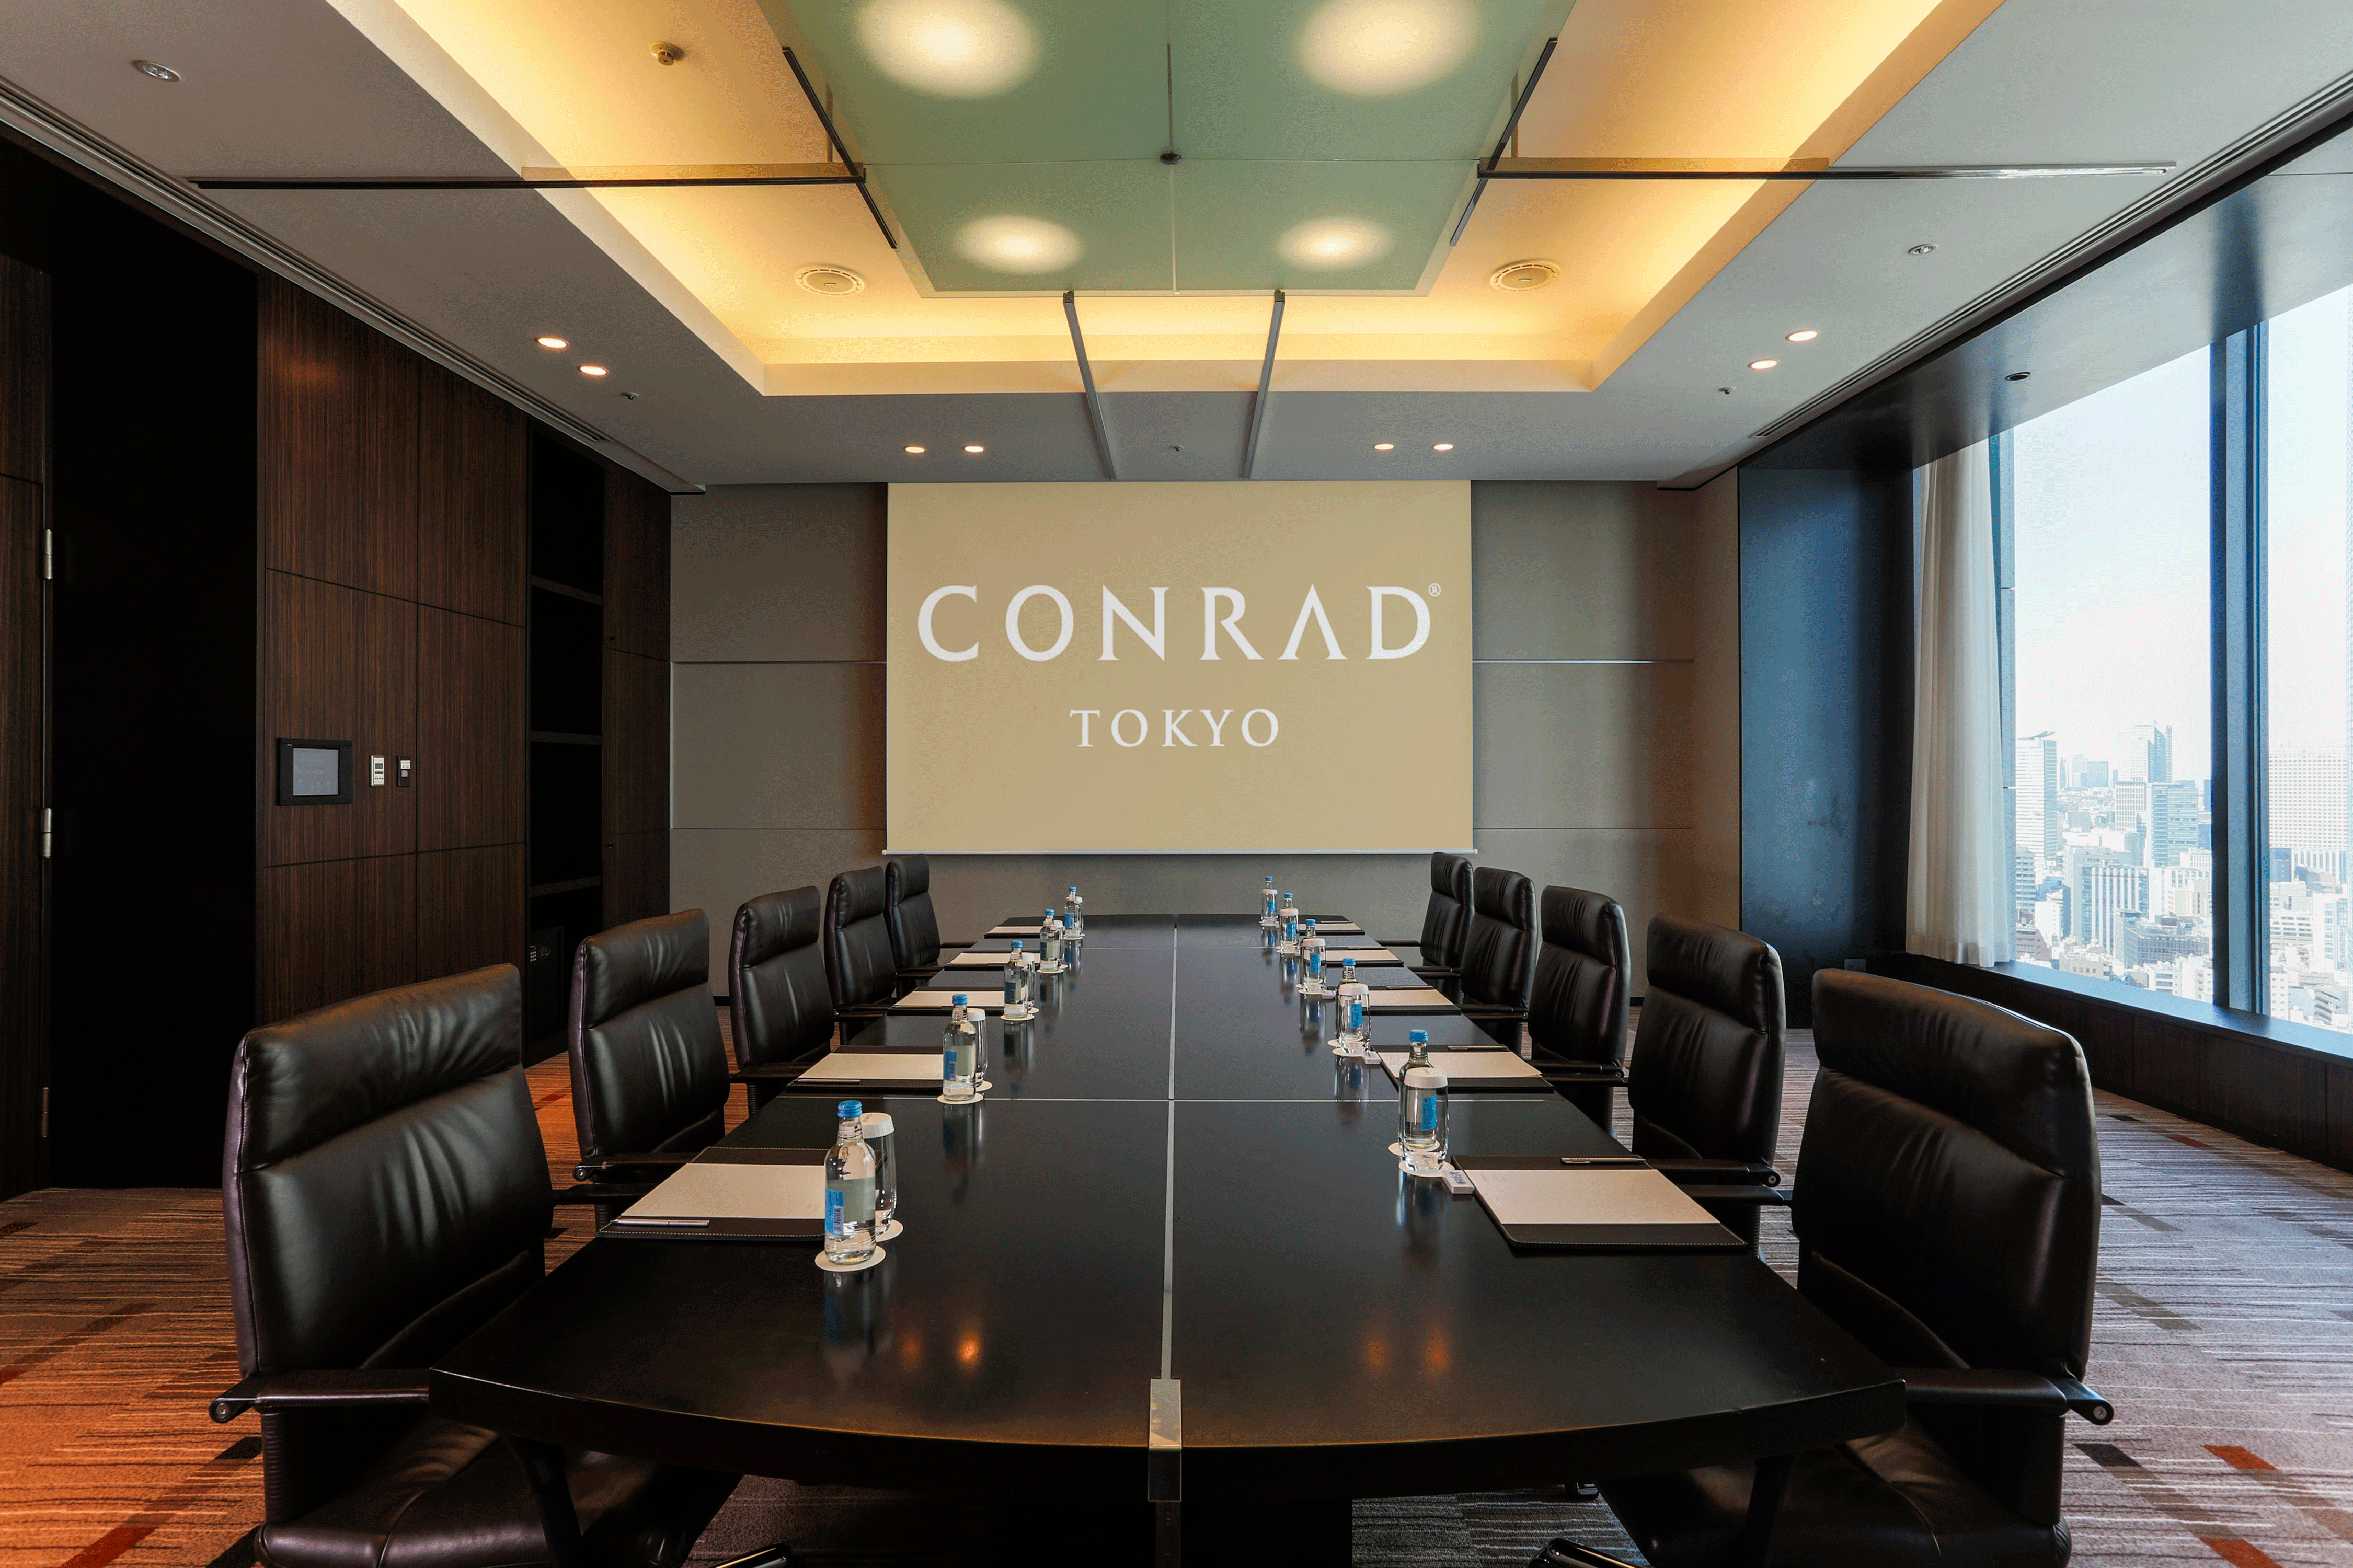 Meeting Room in boardroom setup with Projector Screen